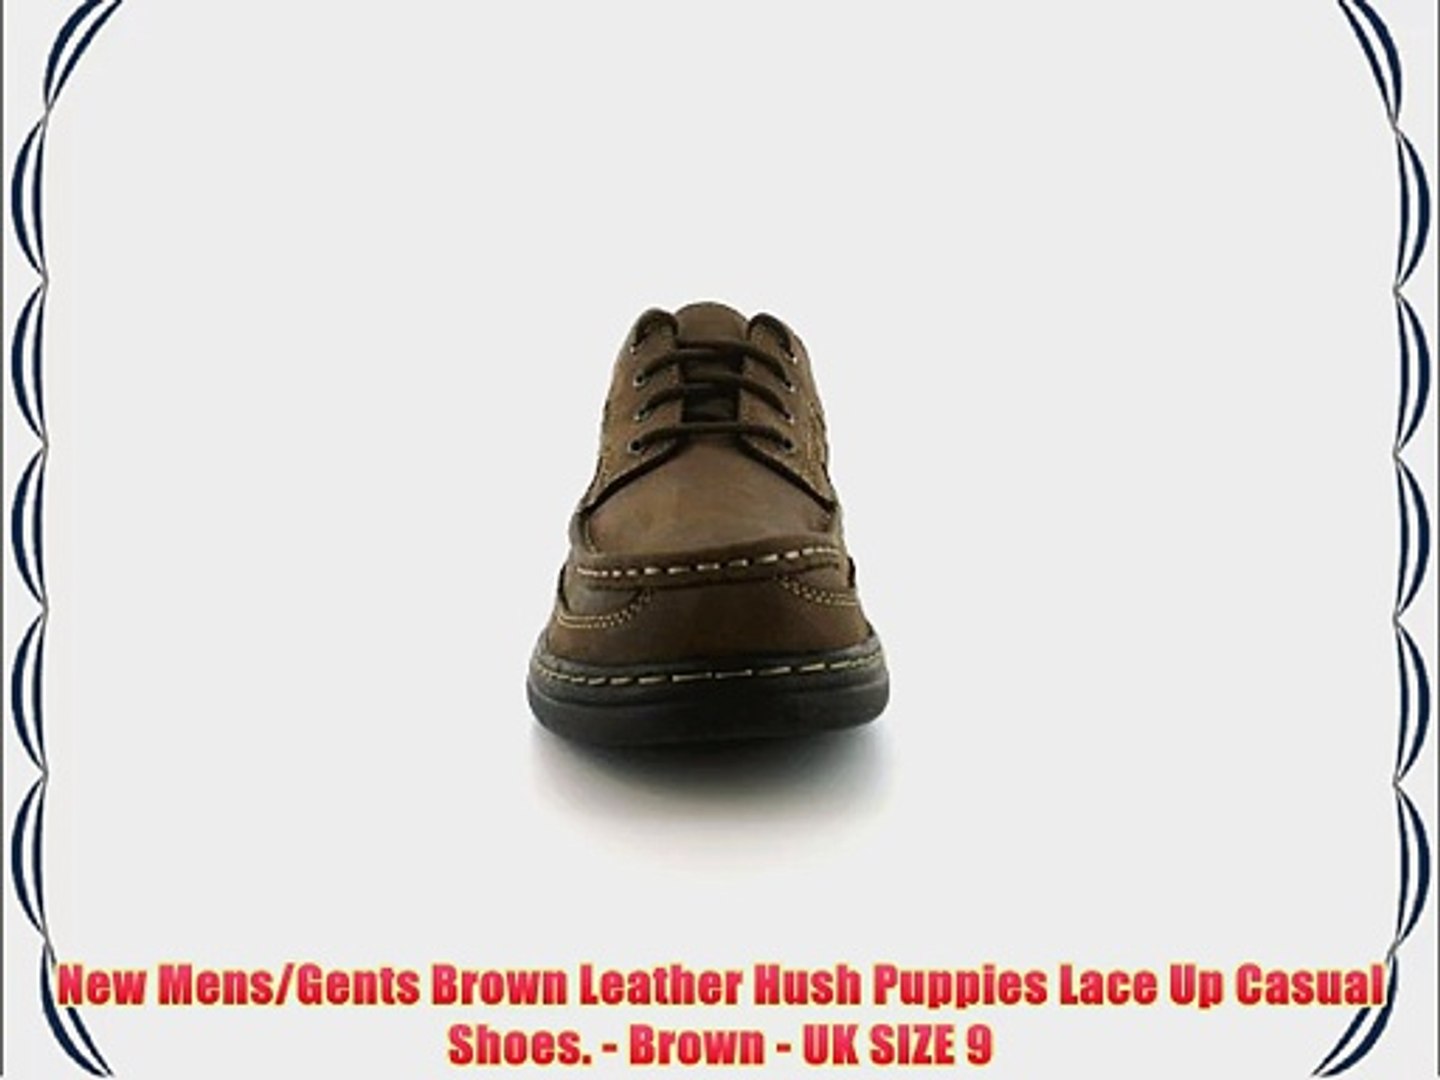 New Mens/Gents Brown Leather Hush Puppies Lace Up Casual Shoes. - Brown -  UK SIZE 9 - video Dailymotion